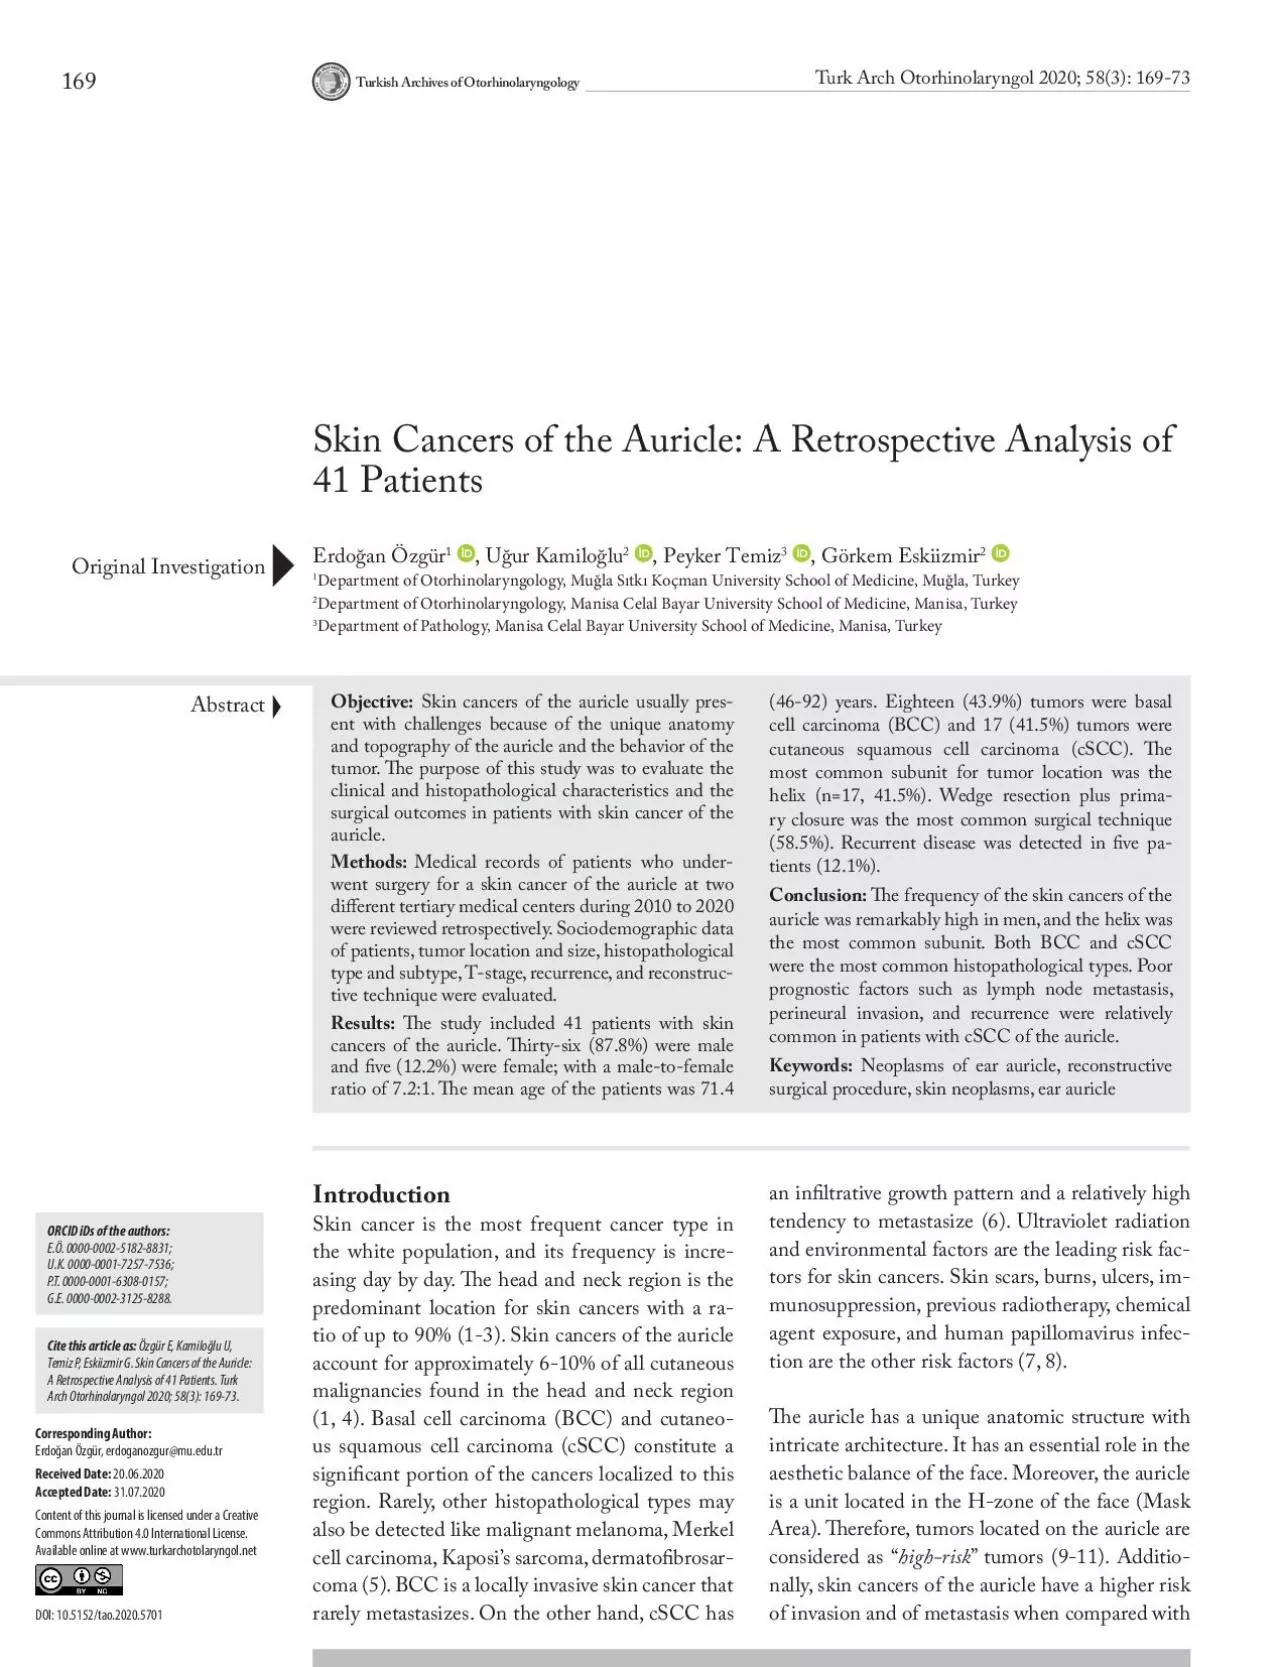 Skin Cancers of the Auricle A Retrospective Analysis of